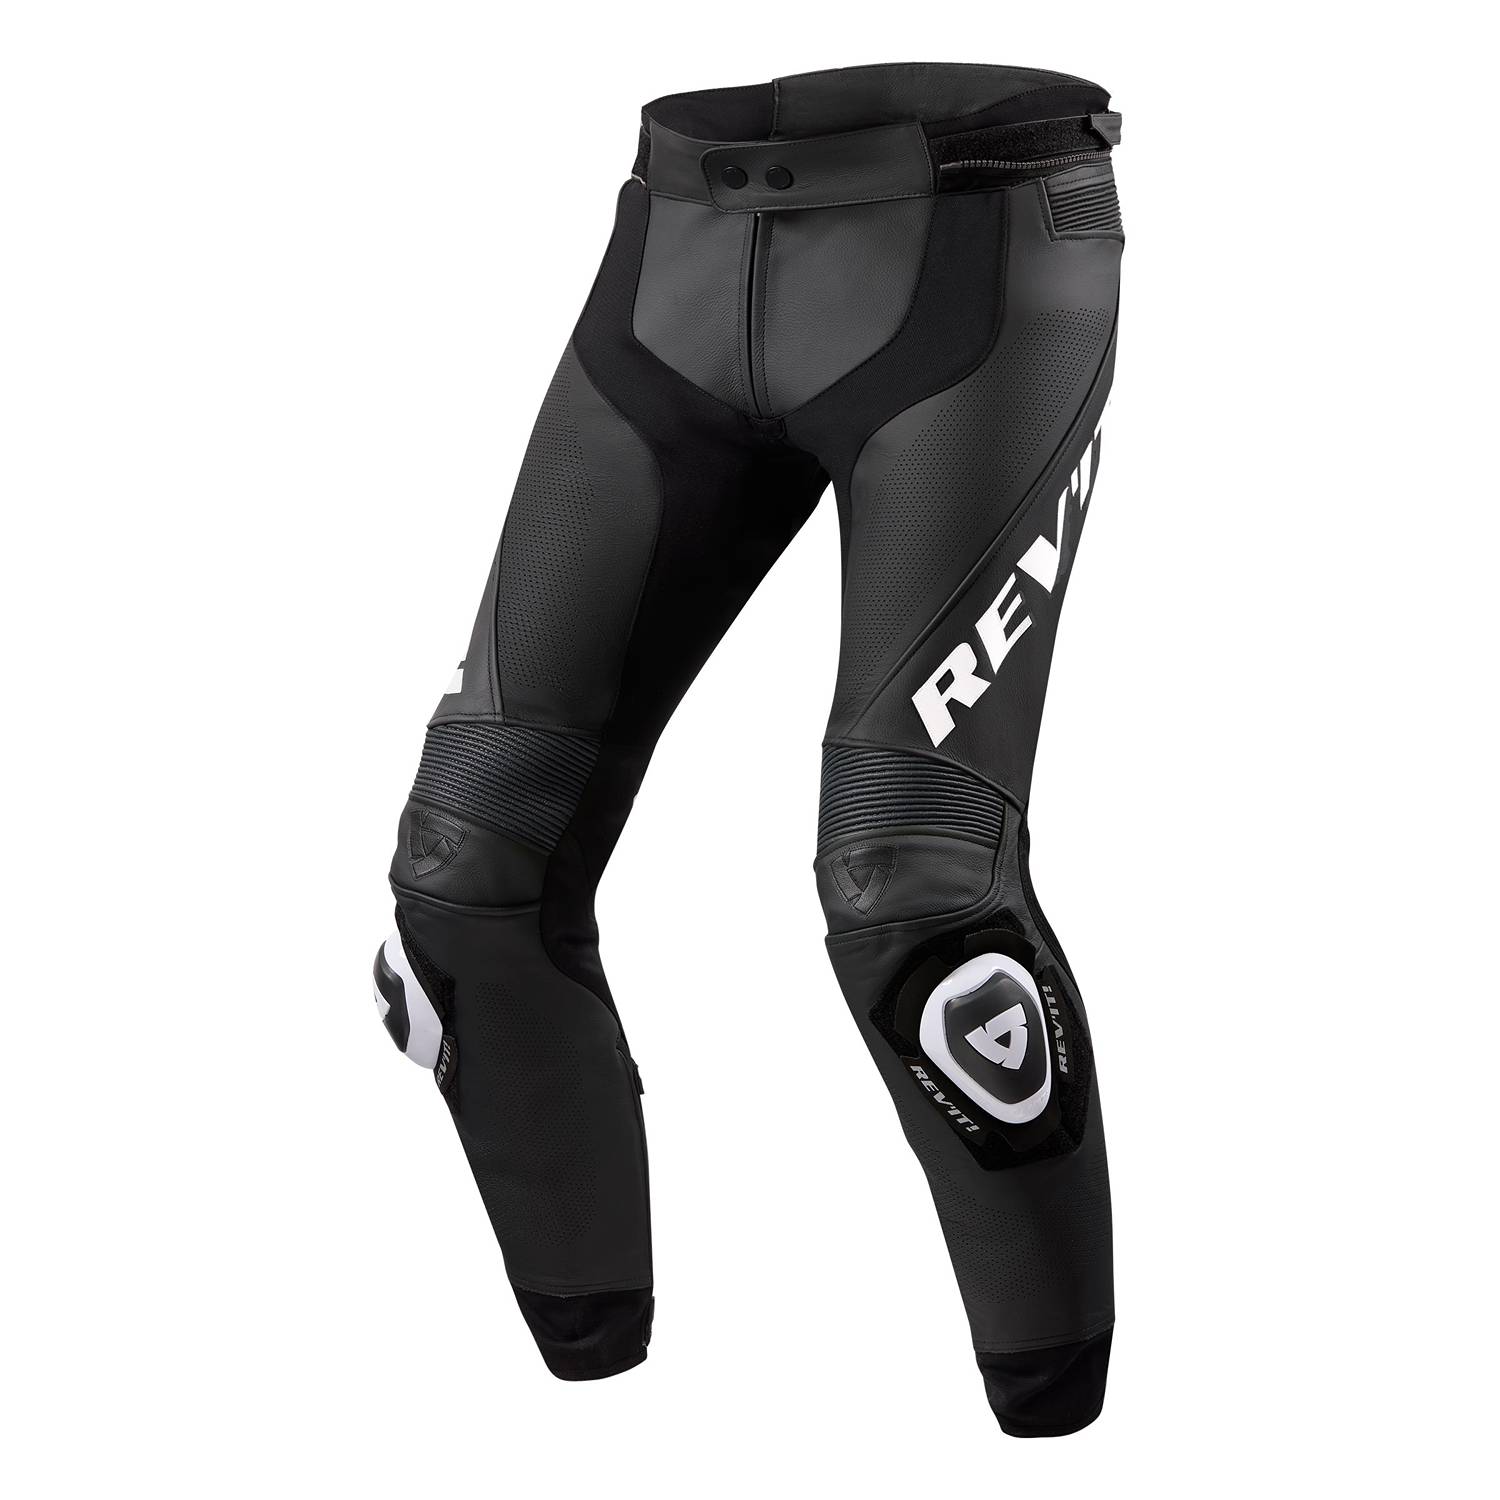 Image of REV'IT! Trousers Apex Black White Standard Size 48 ID 8700001315647